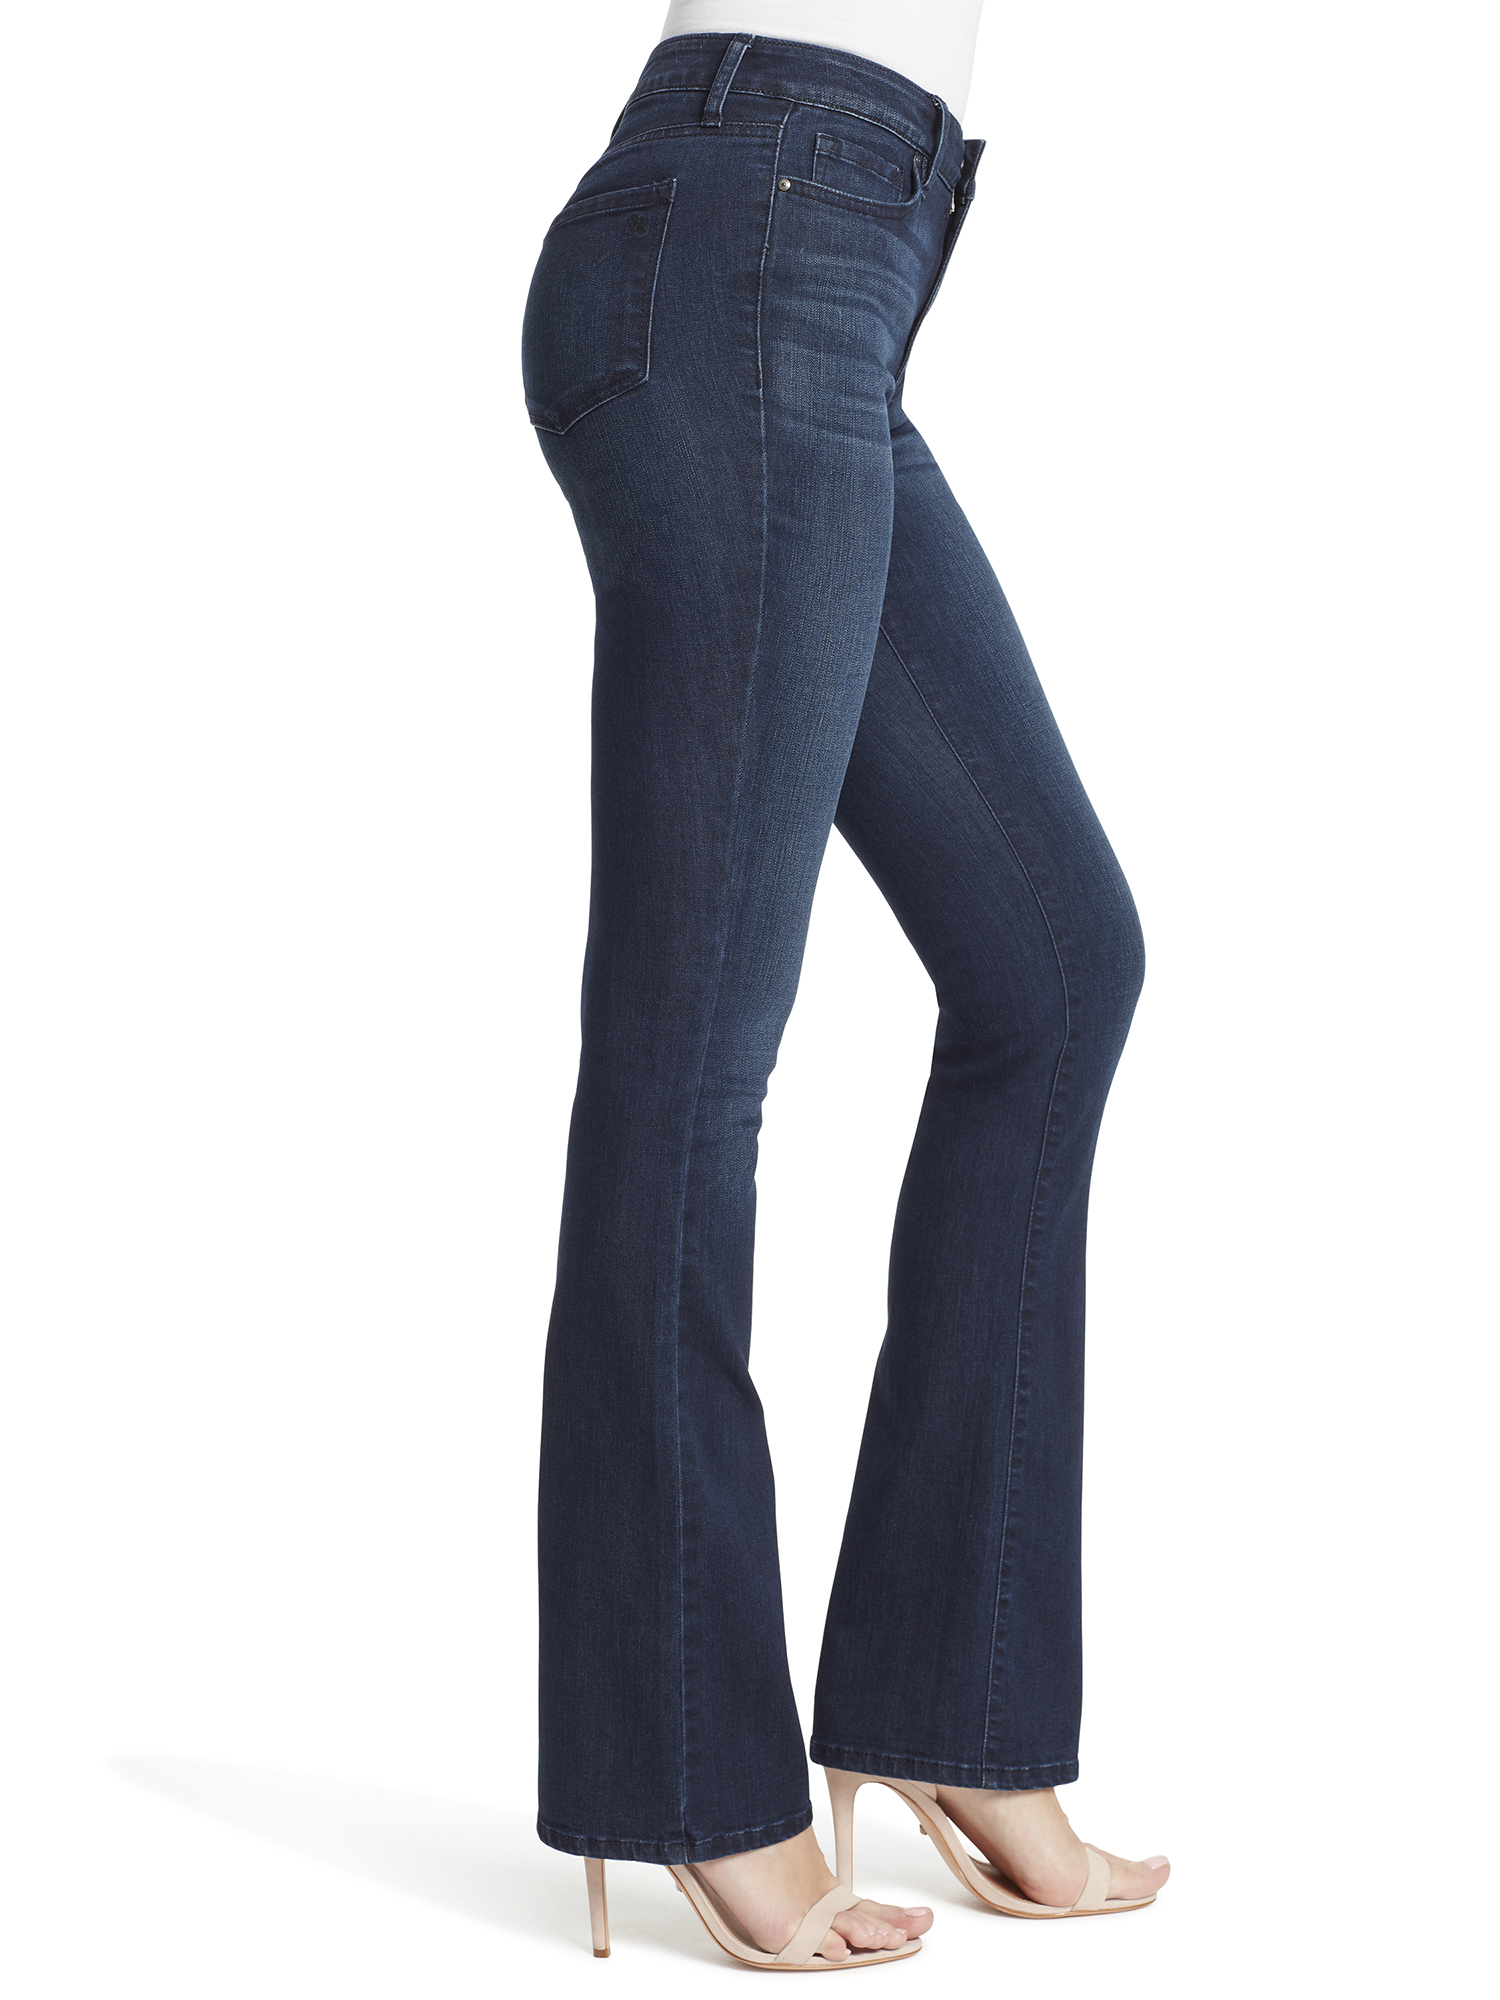 Jessica Simpson Women's Truly Yours Bootcut Jean - image 3 of 4